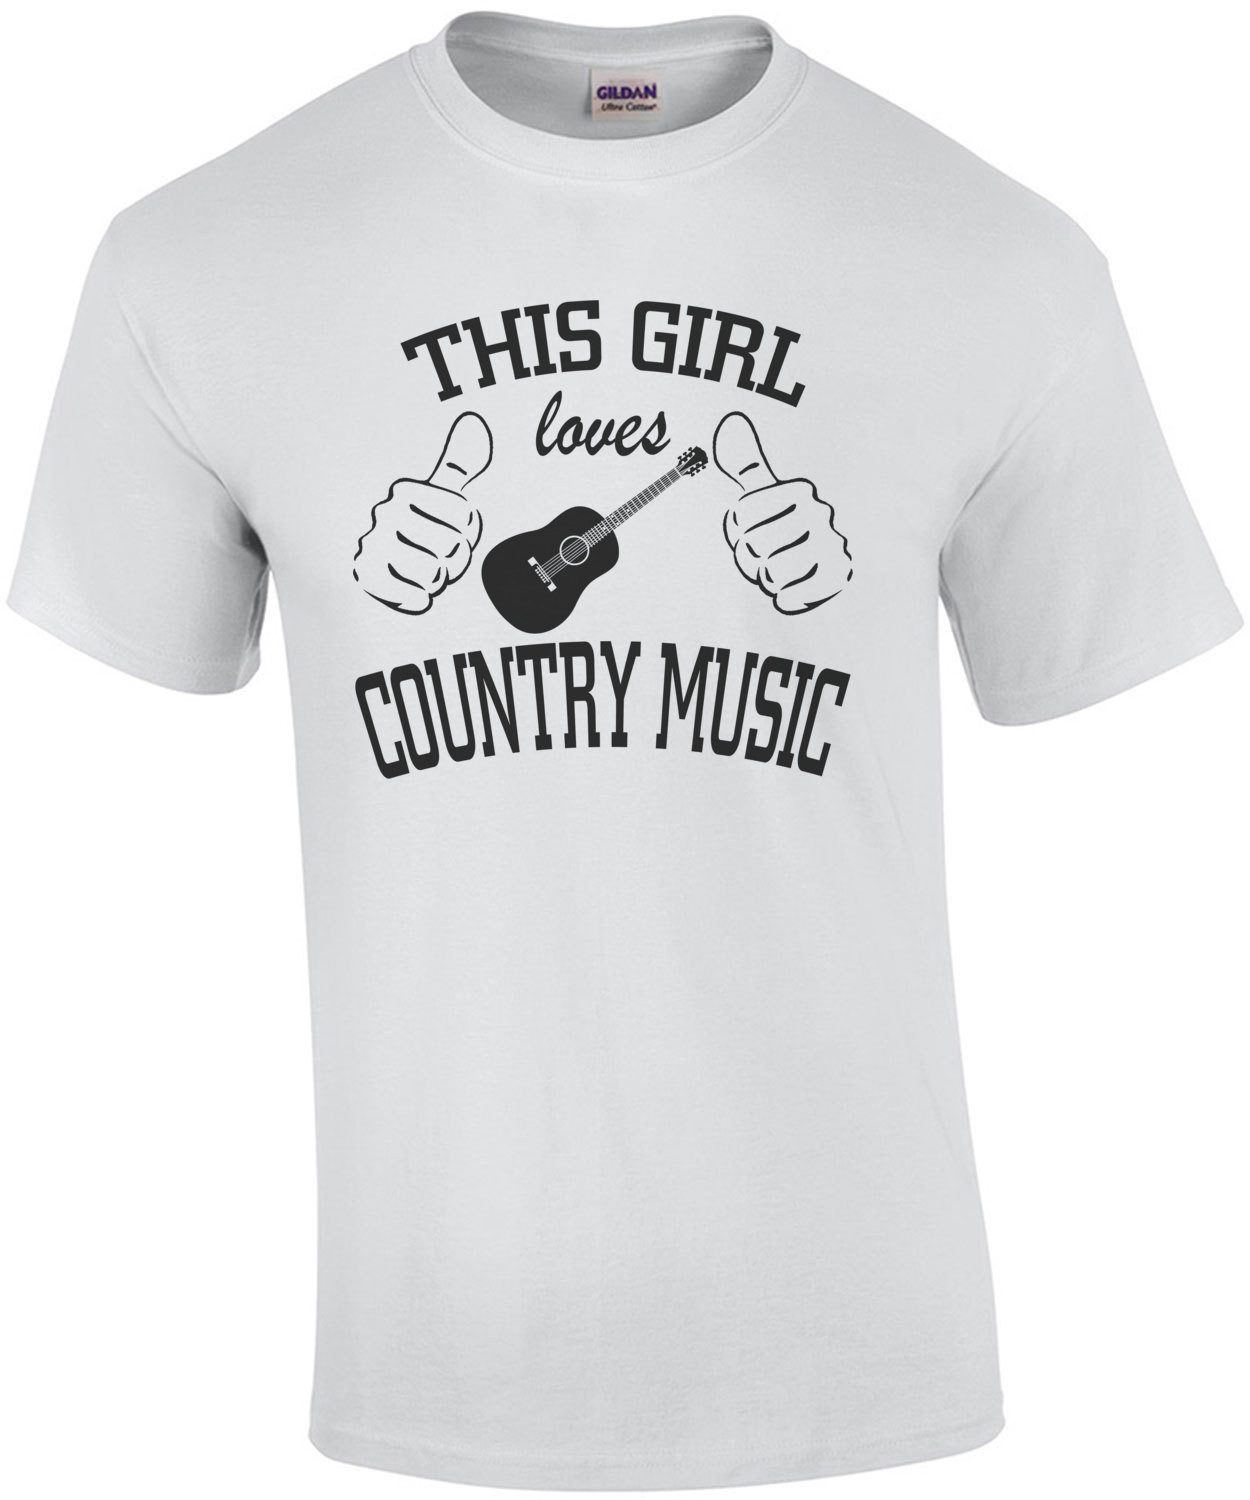 This Girl Loves Country Music T-Shirt